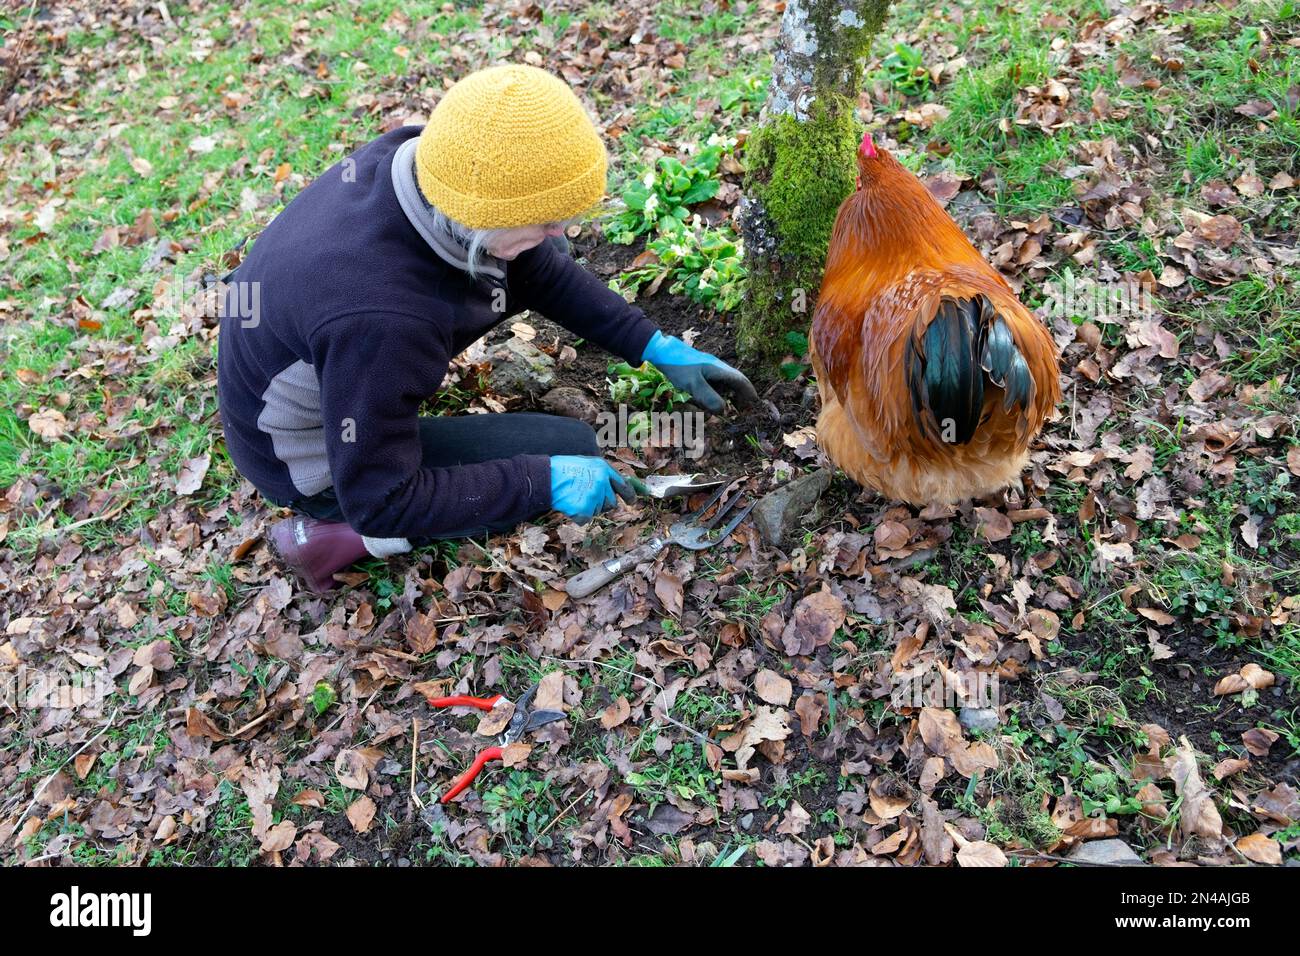 Older woman person gardening weeding digging soil around polyanthus flowers planted around tree in February winter early spring Wales UK KATHY DEWITT Stock Photo